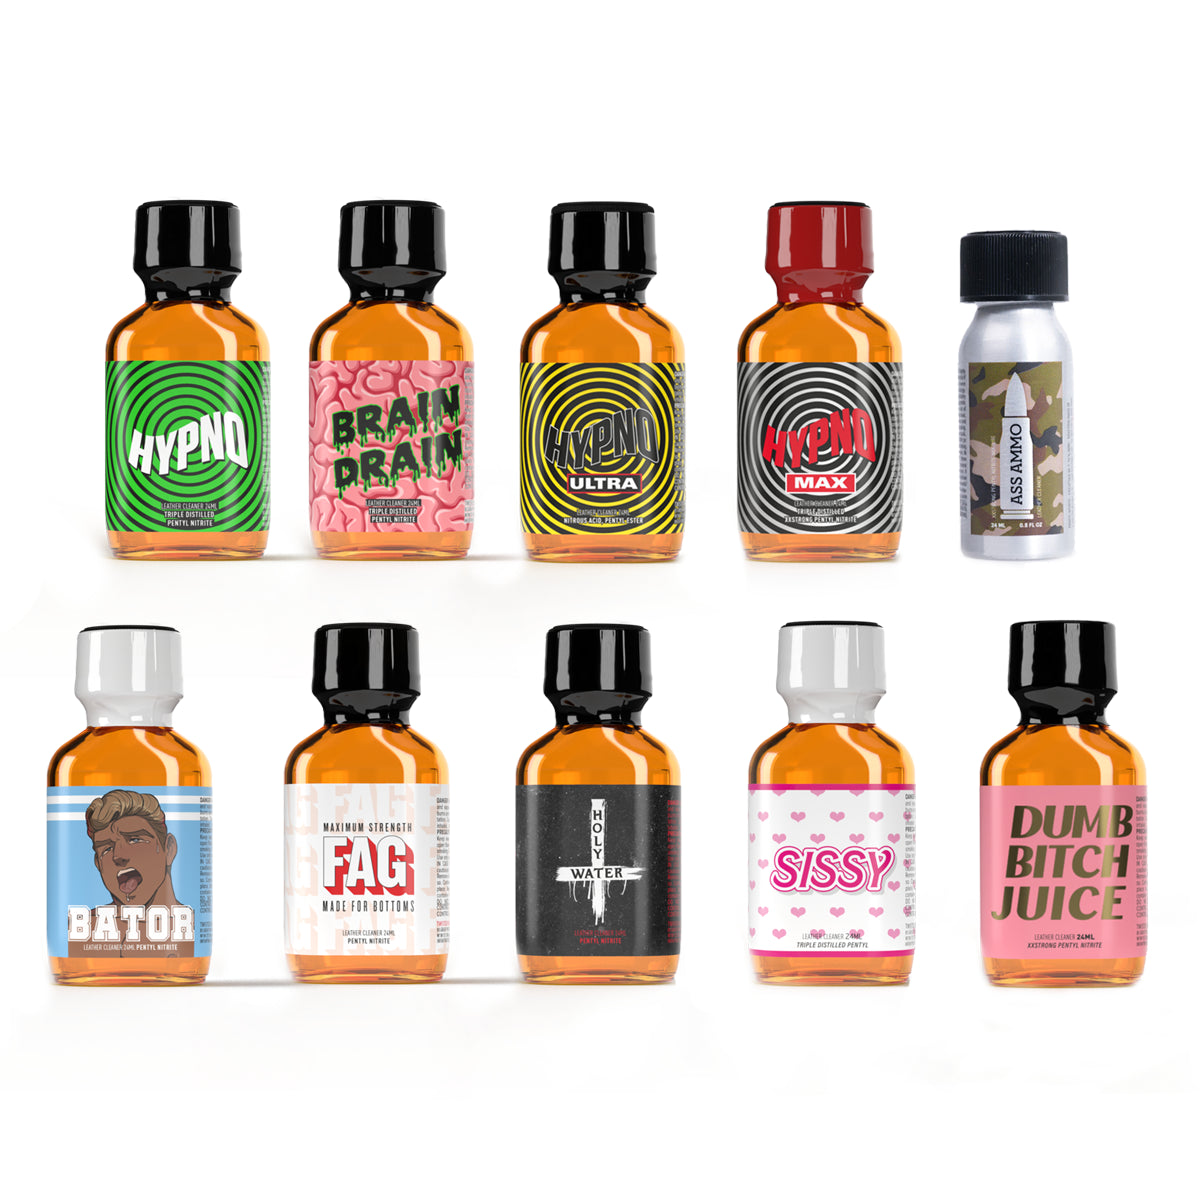 TWISTED BEAST ORIGINALS, POPPERS UK, POPPERS USA, FREE DELIVERY, NEXT DAY DELIVERY